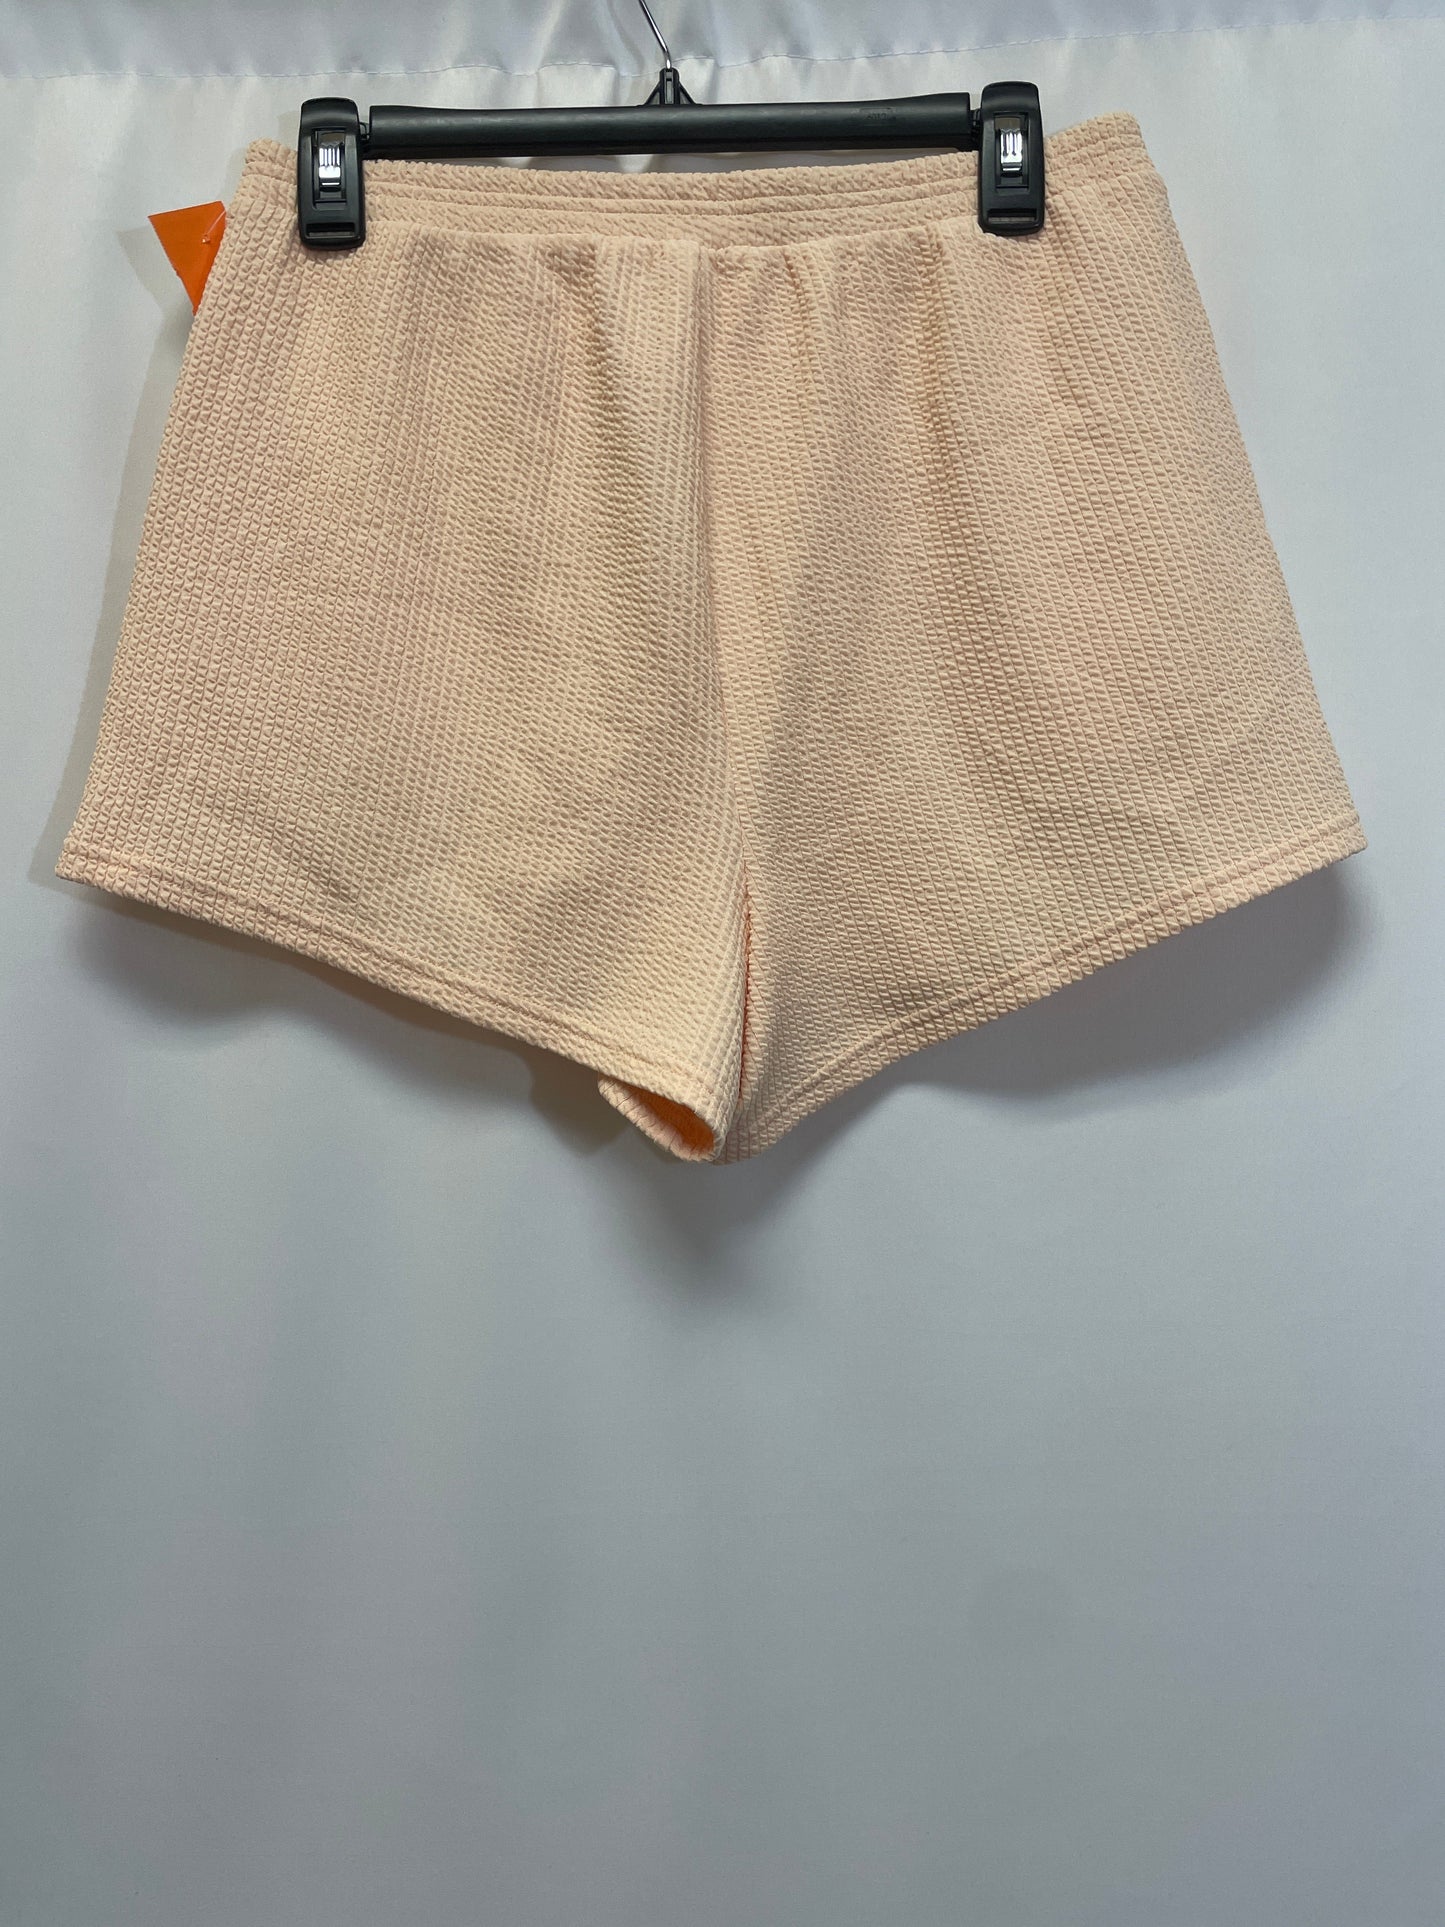 Athletic Shorts By Fabletics  Size: M